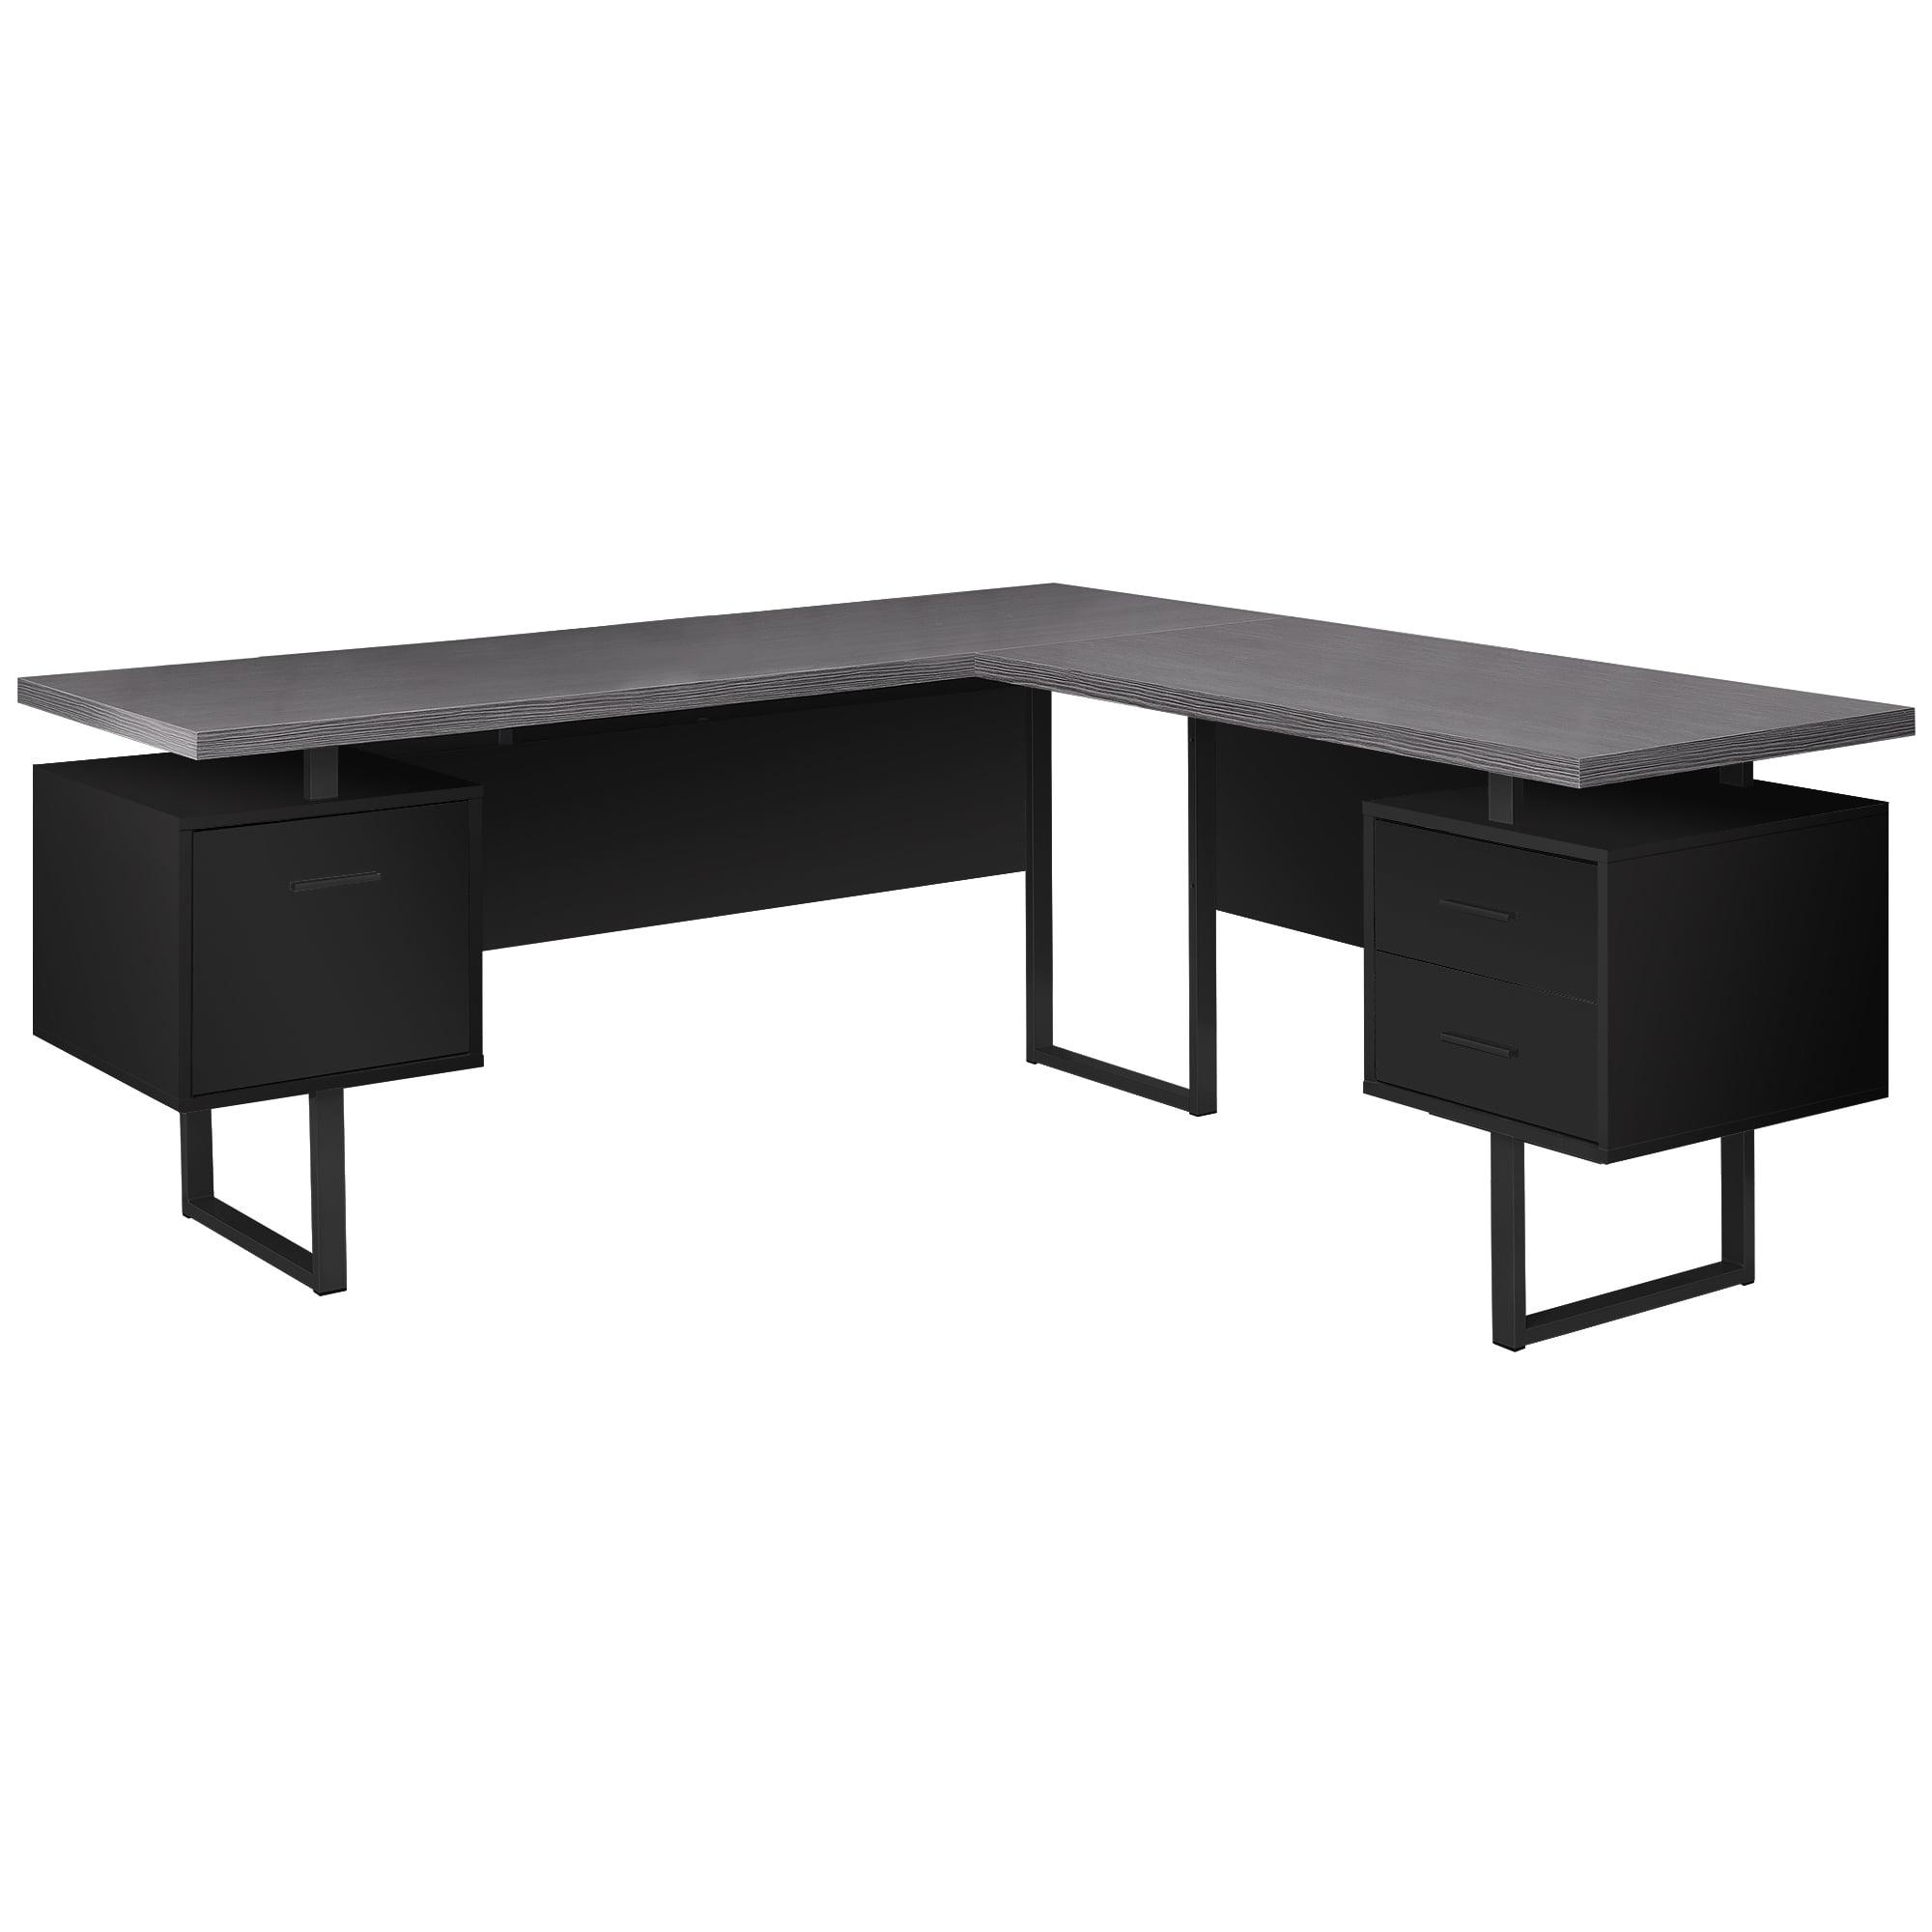 Sleek Black and Gray Wood Corner Computer Desk with U-Shaped Legs and Drawers